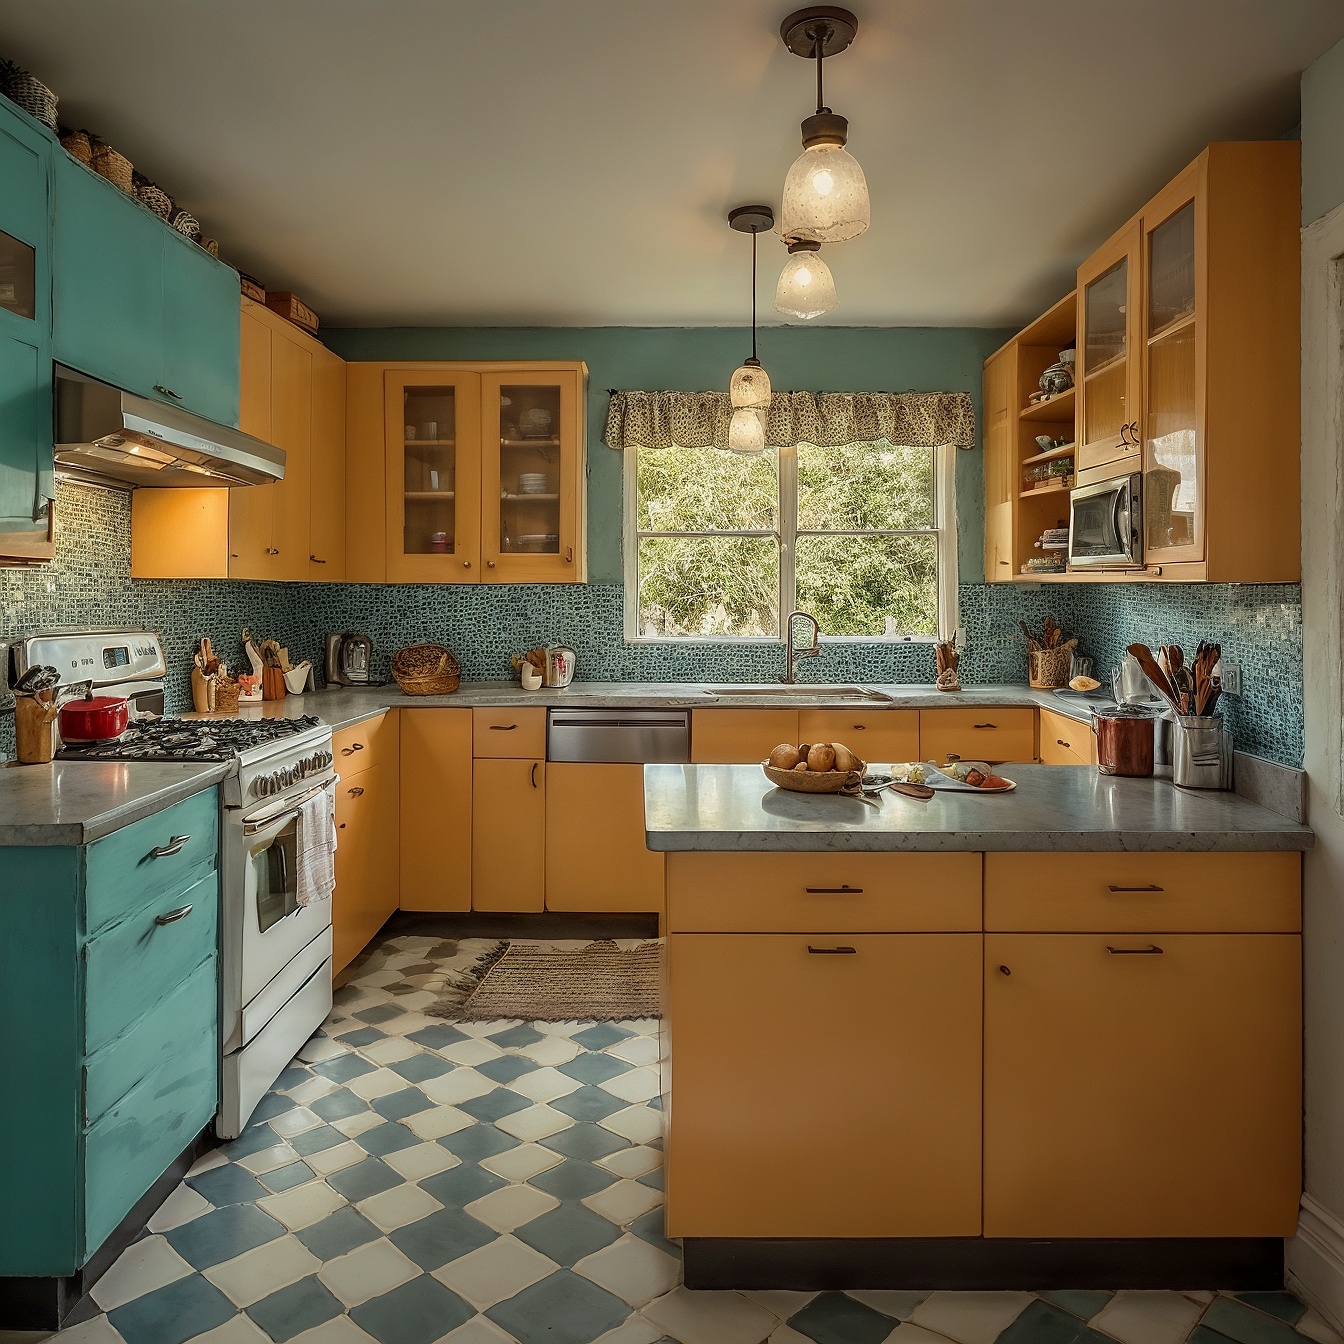 Vintage Kitchen Layout with Retro Appliances, Colorful Cabinetry, Checkered Floor Tiles